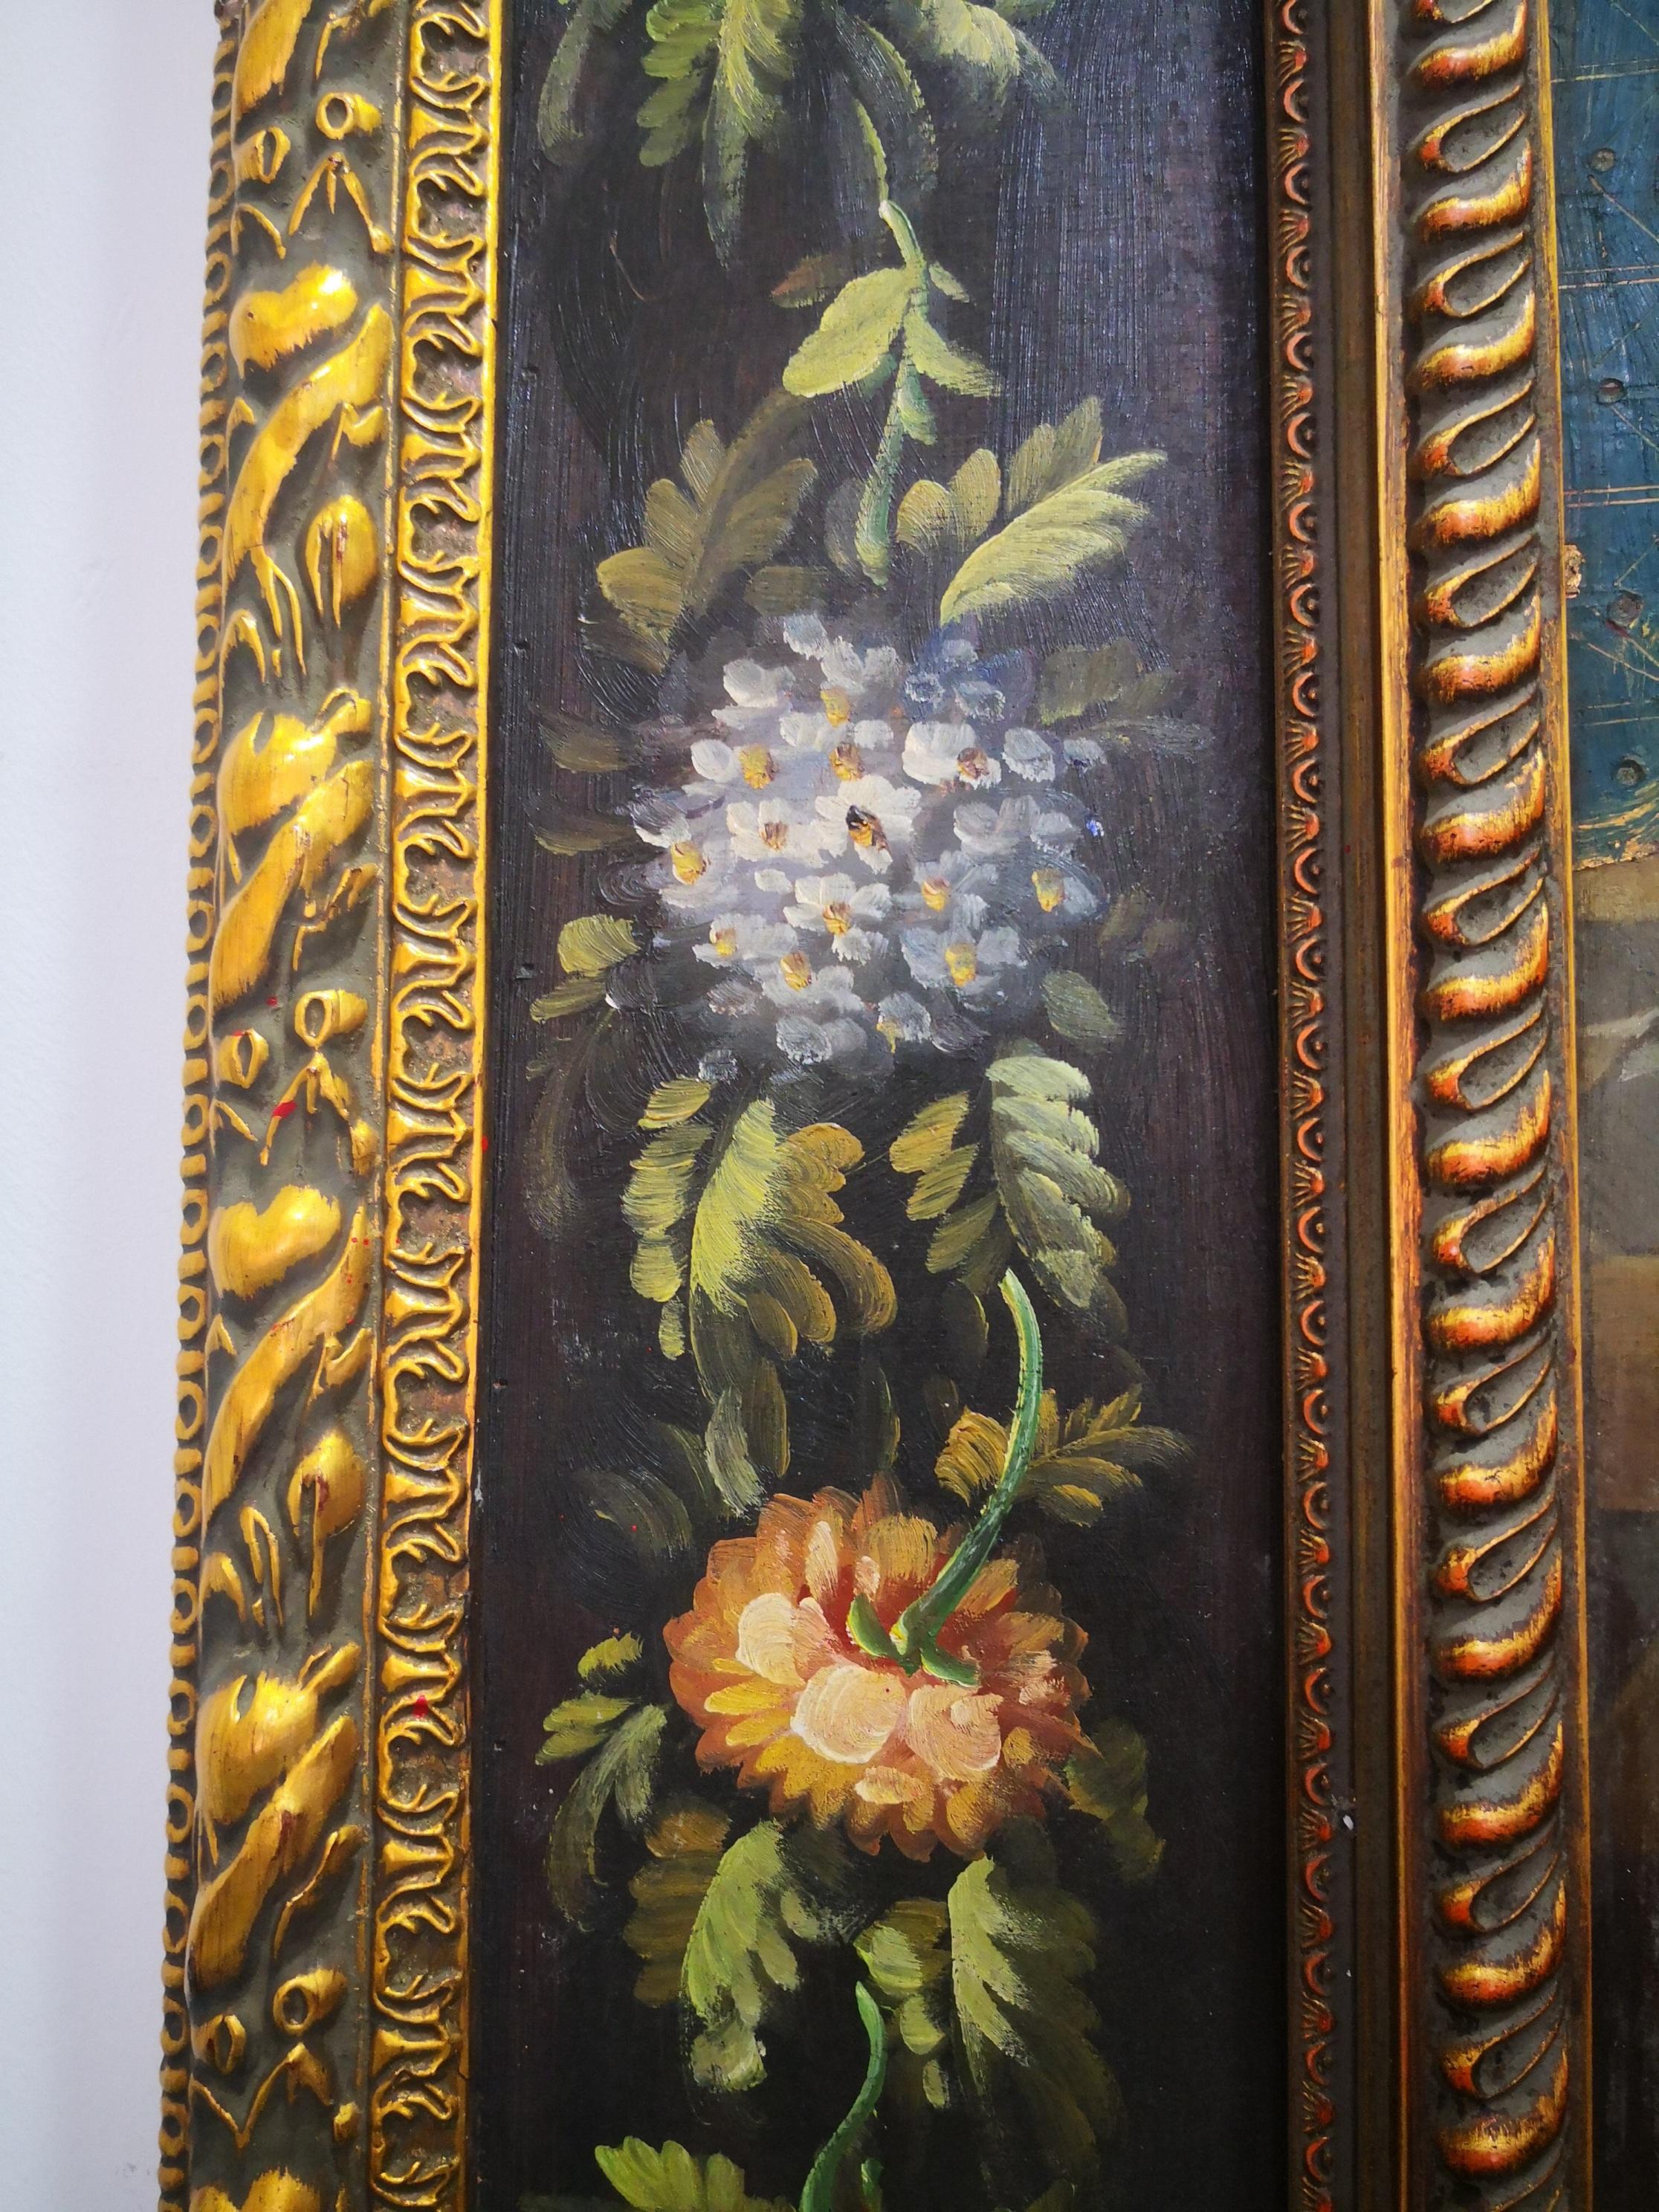 1990s Spanish Hand-Painted Oil on Wood Reproduction in the Gothic Style For Sale 4